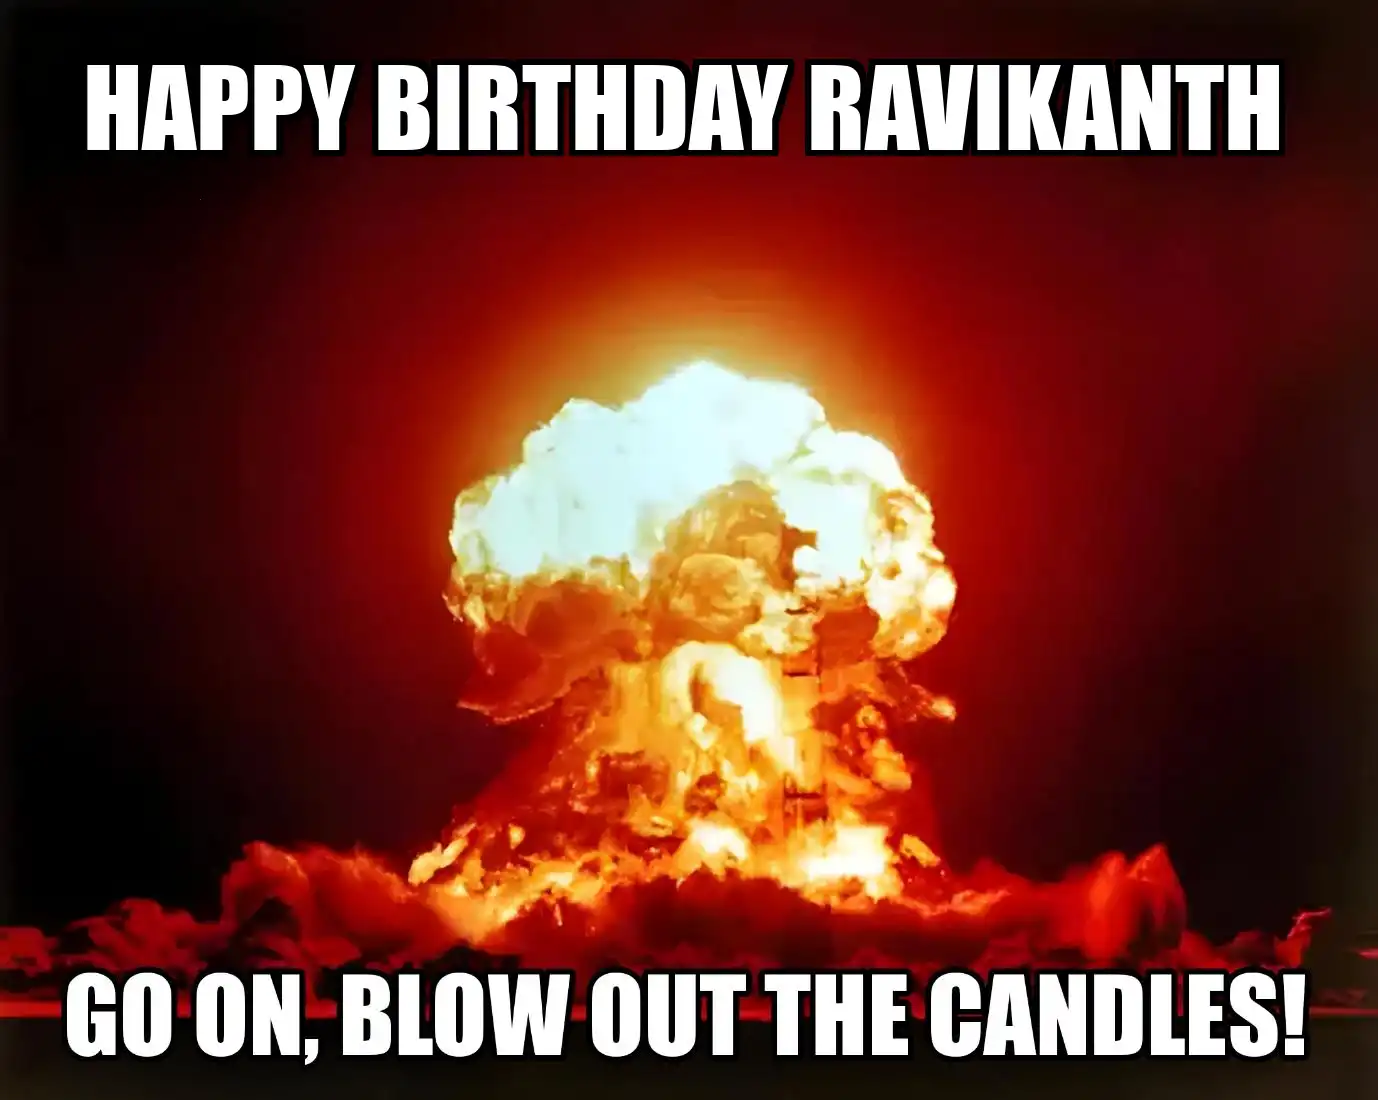 Happy Birthday Ravikanth Go On Blow Out The Candles Meme